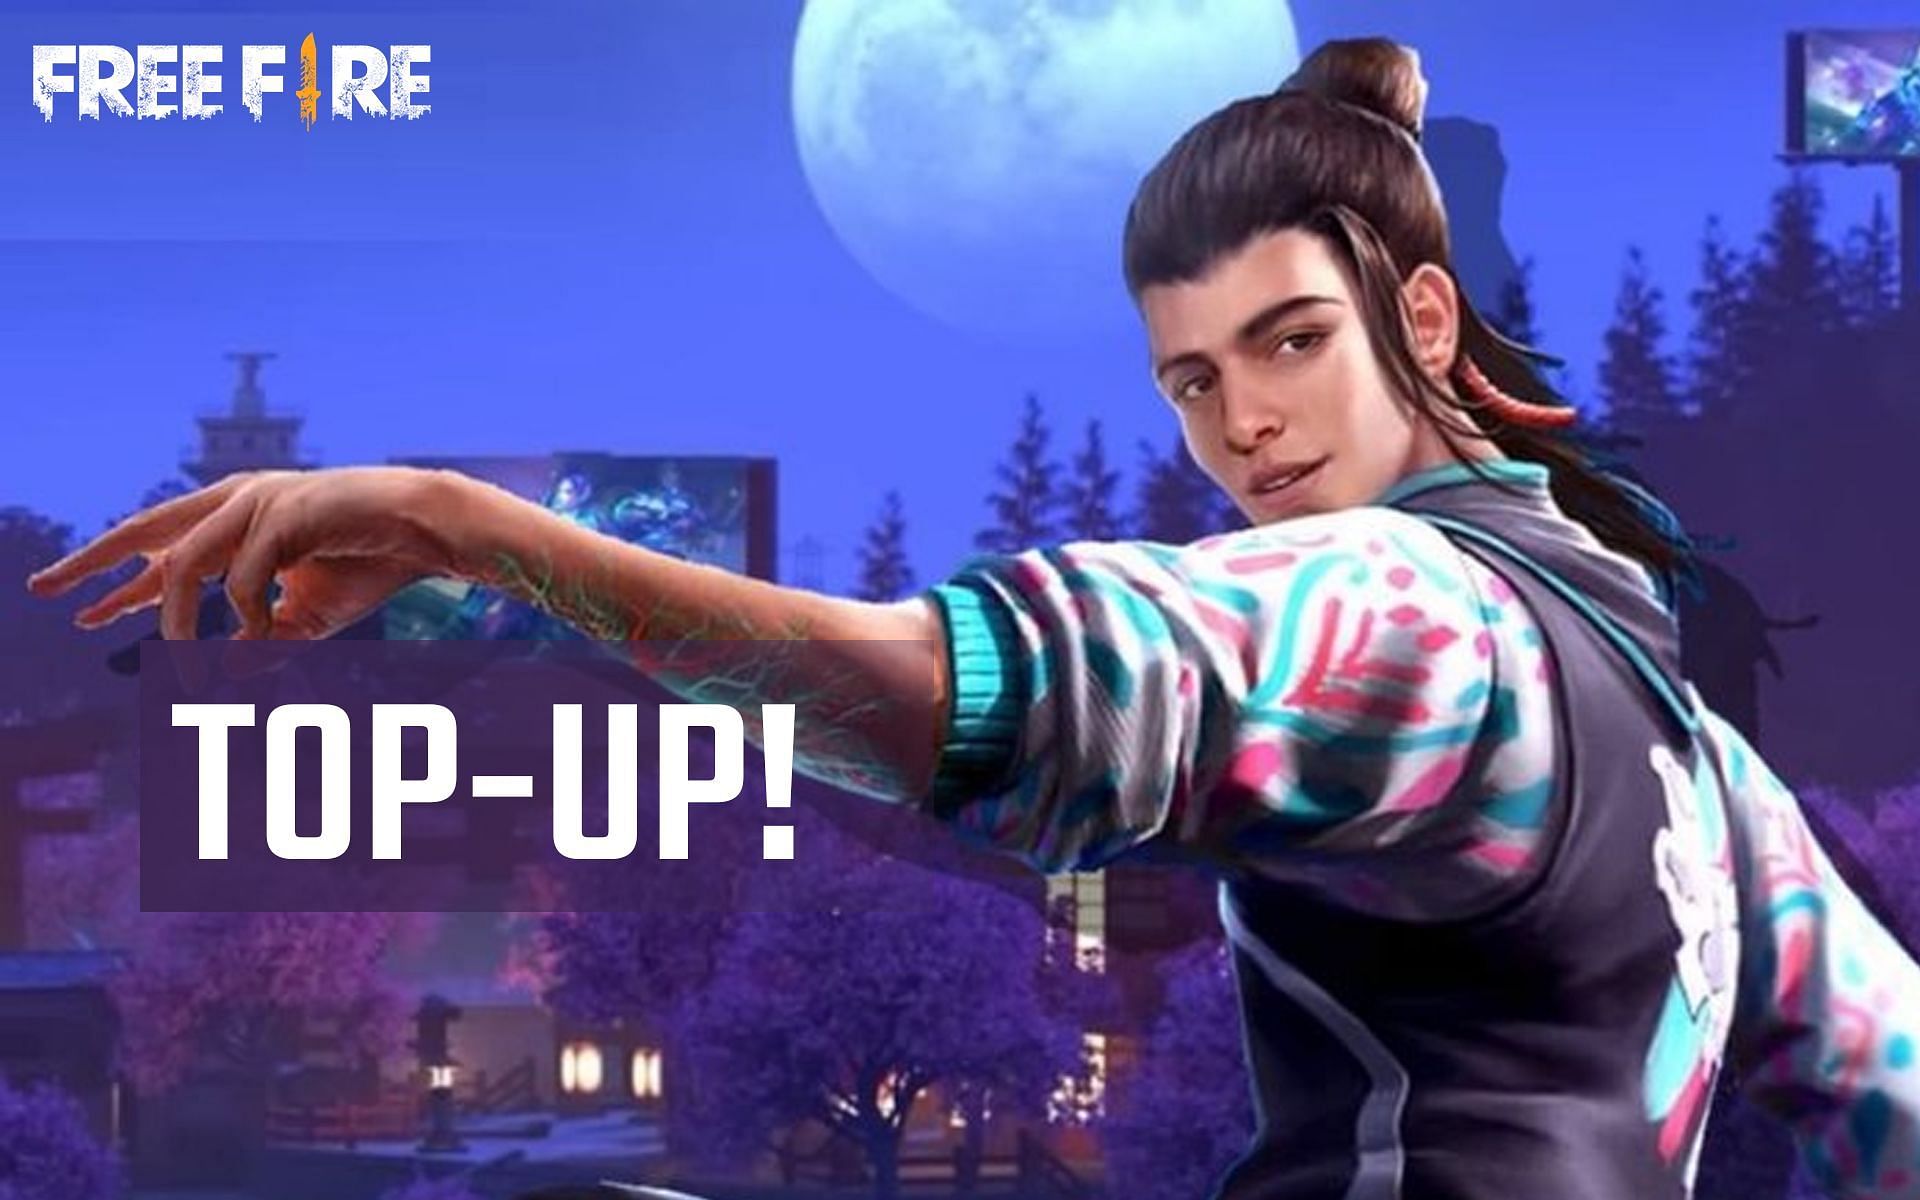 Players can acquire Otho for free in the latest top-up event in Free Fire (Image via Sportskeeda)